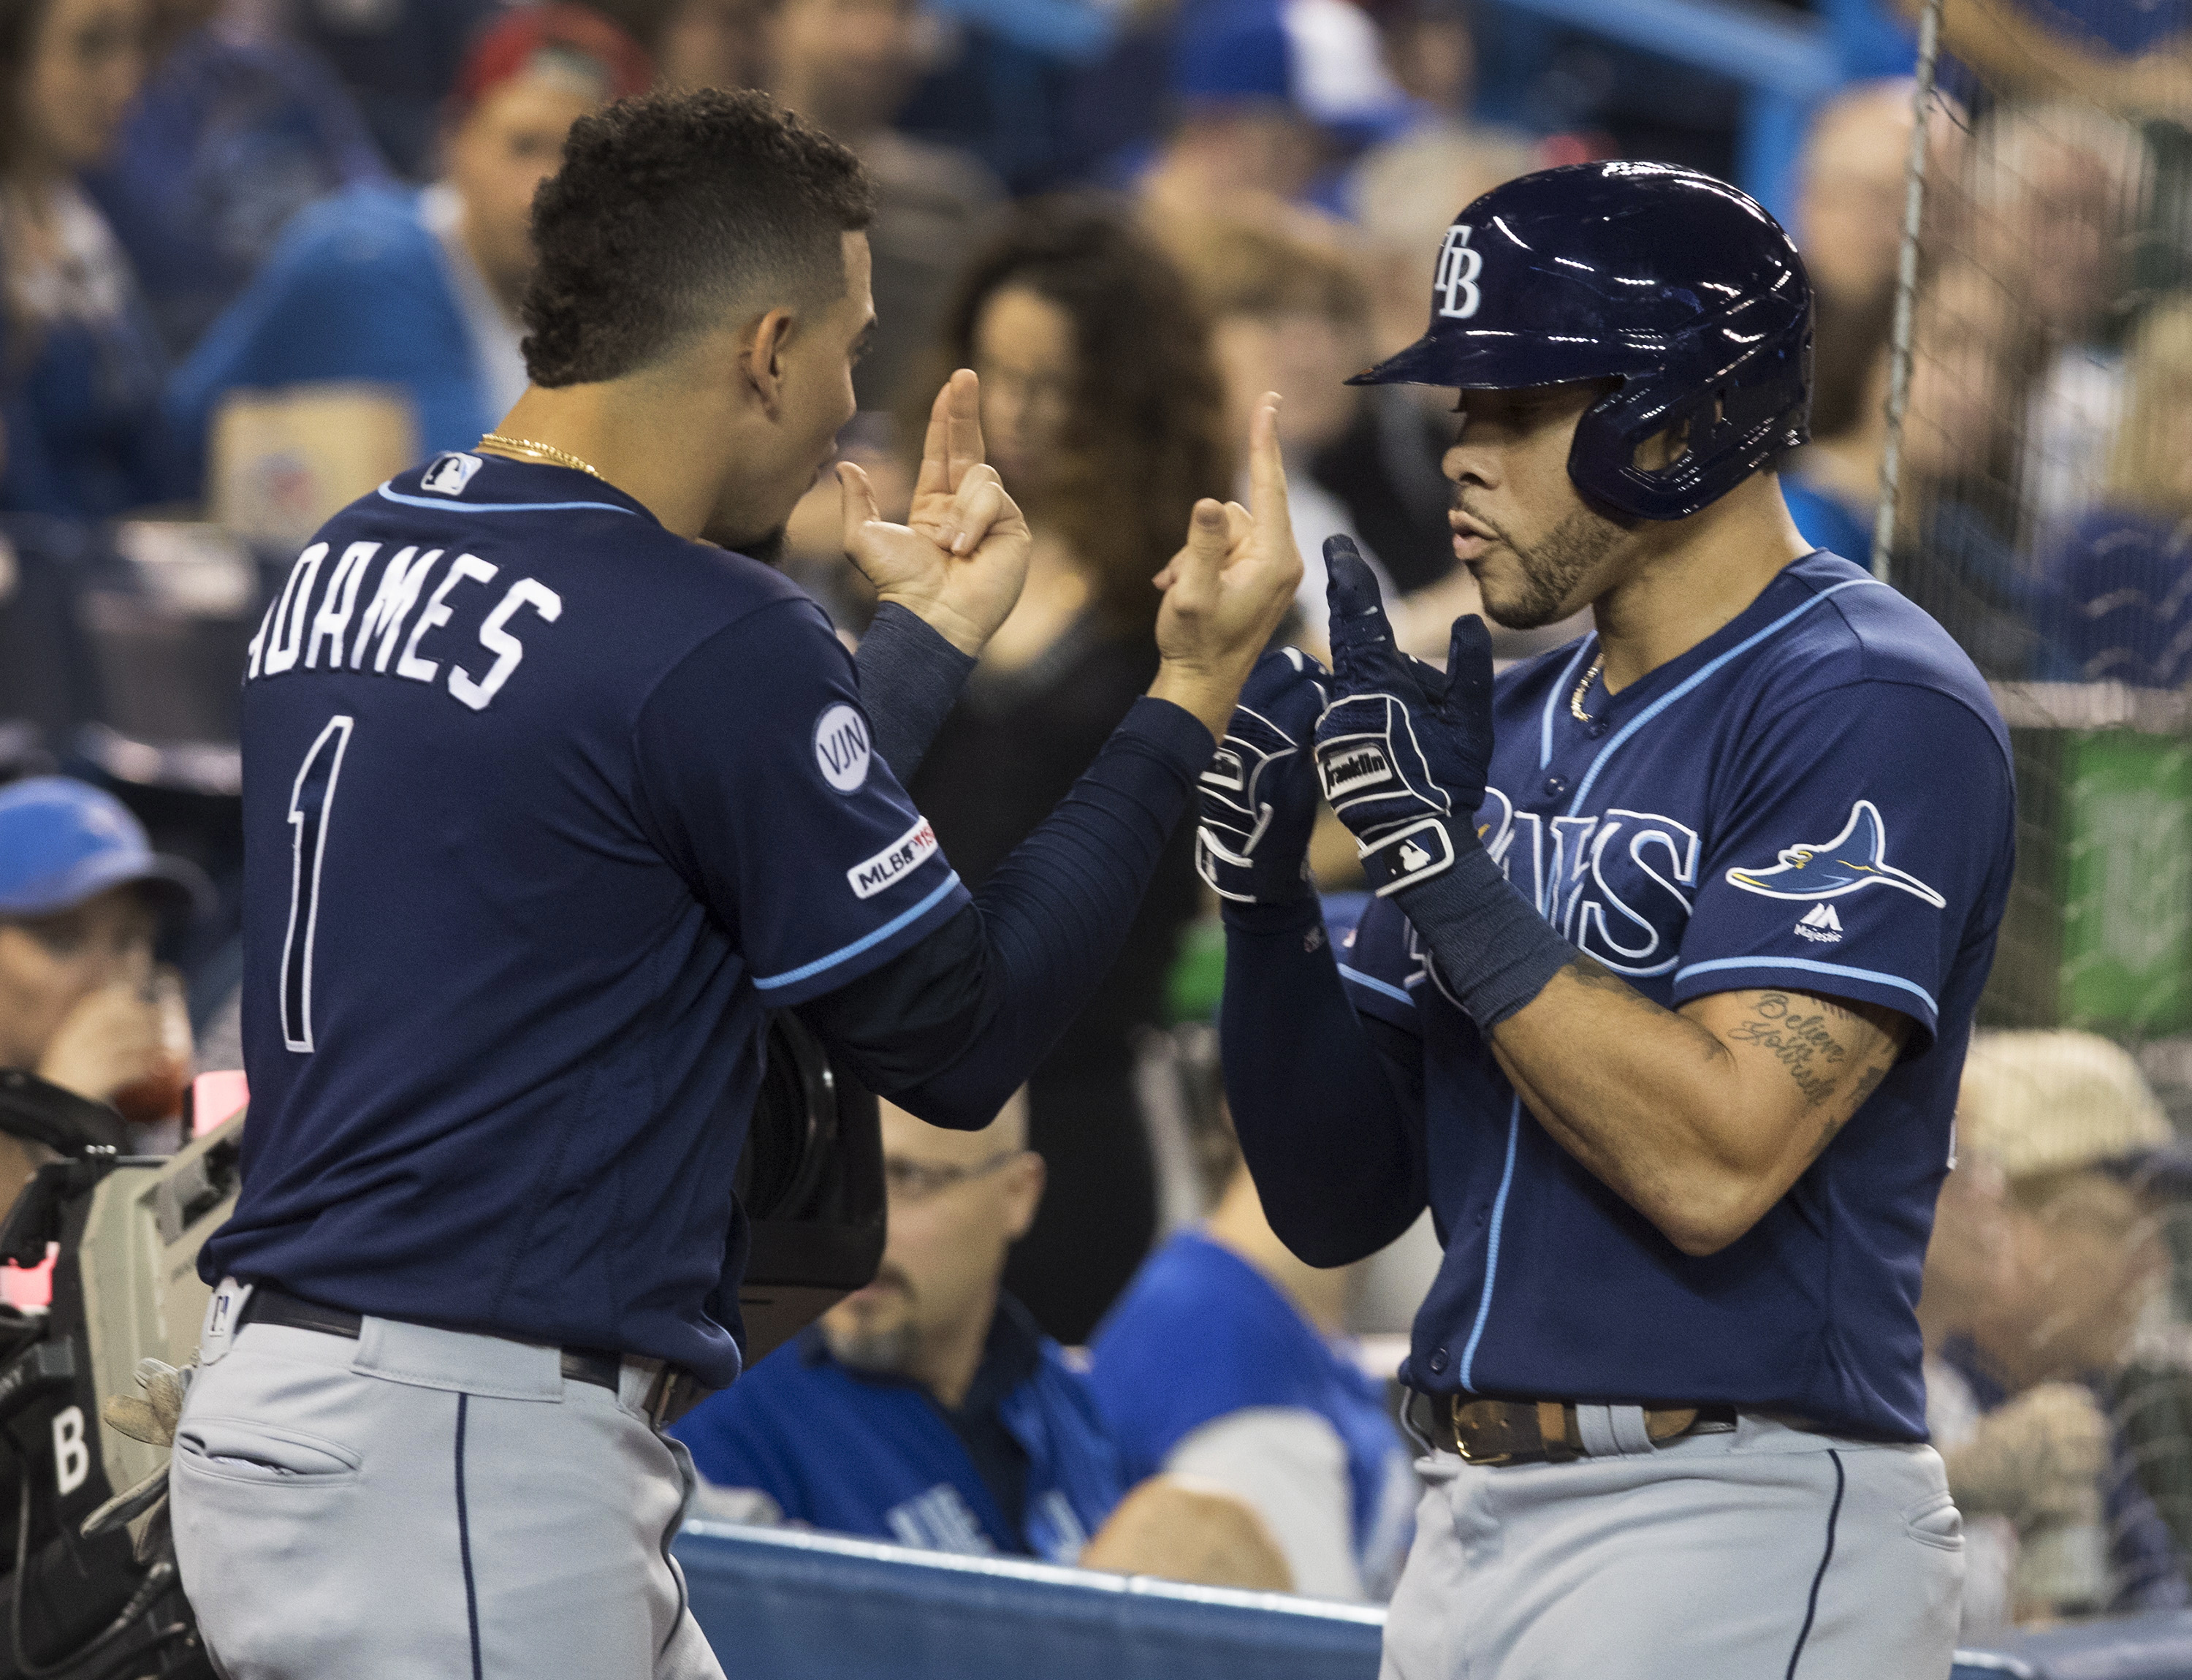 Rays beat Jays 6-2, back in playoffs for 1st time since 2013